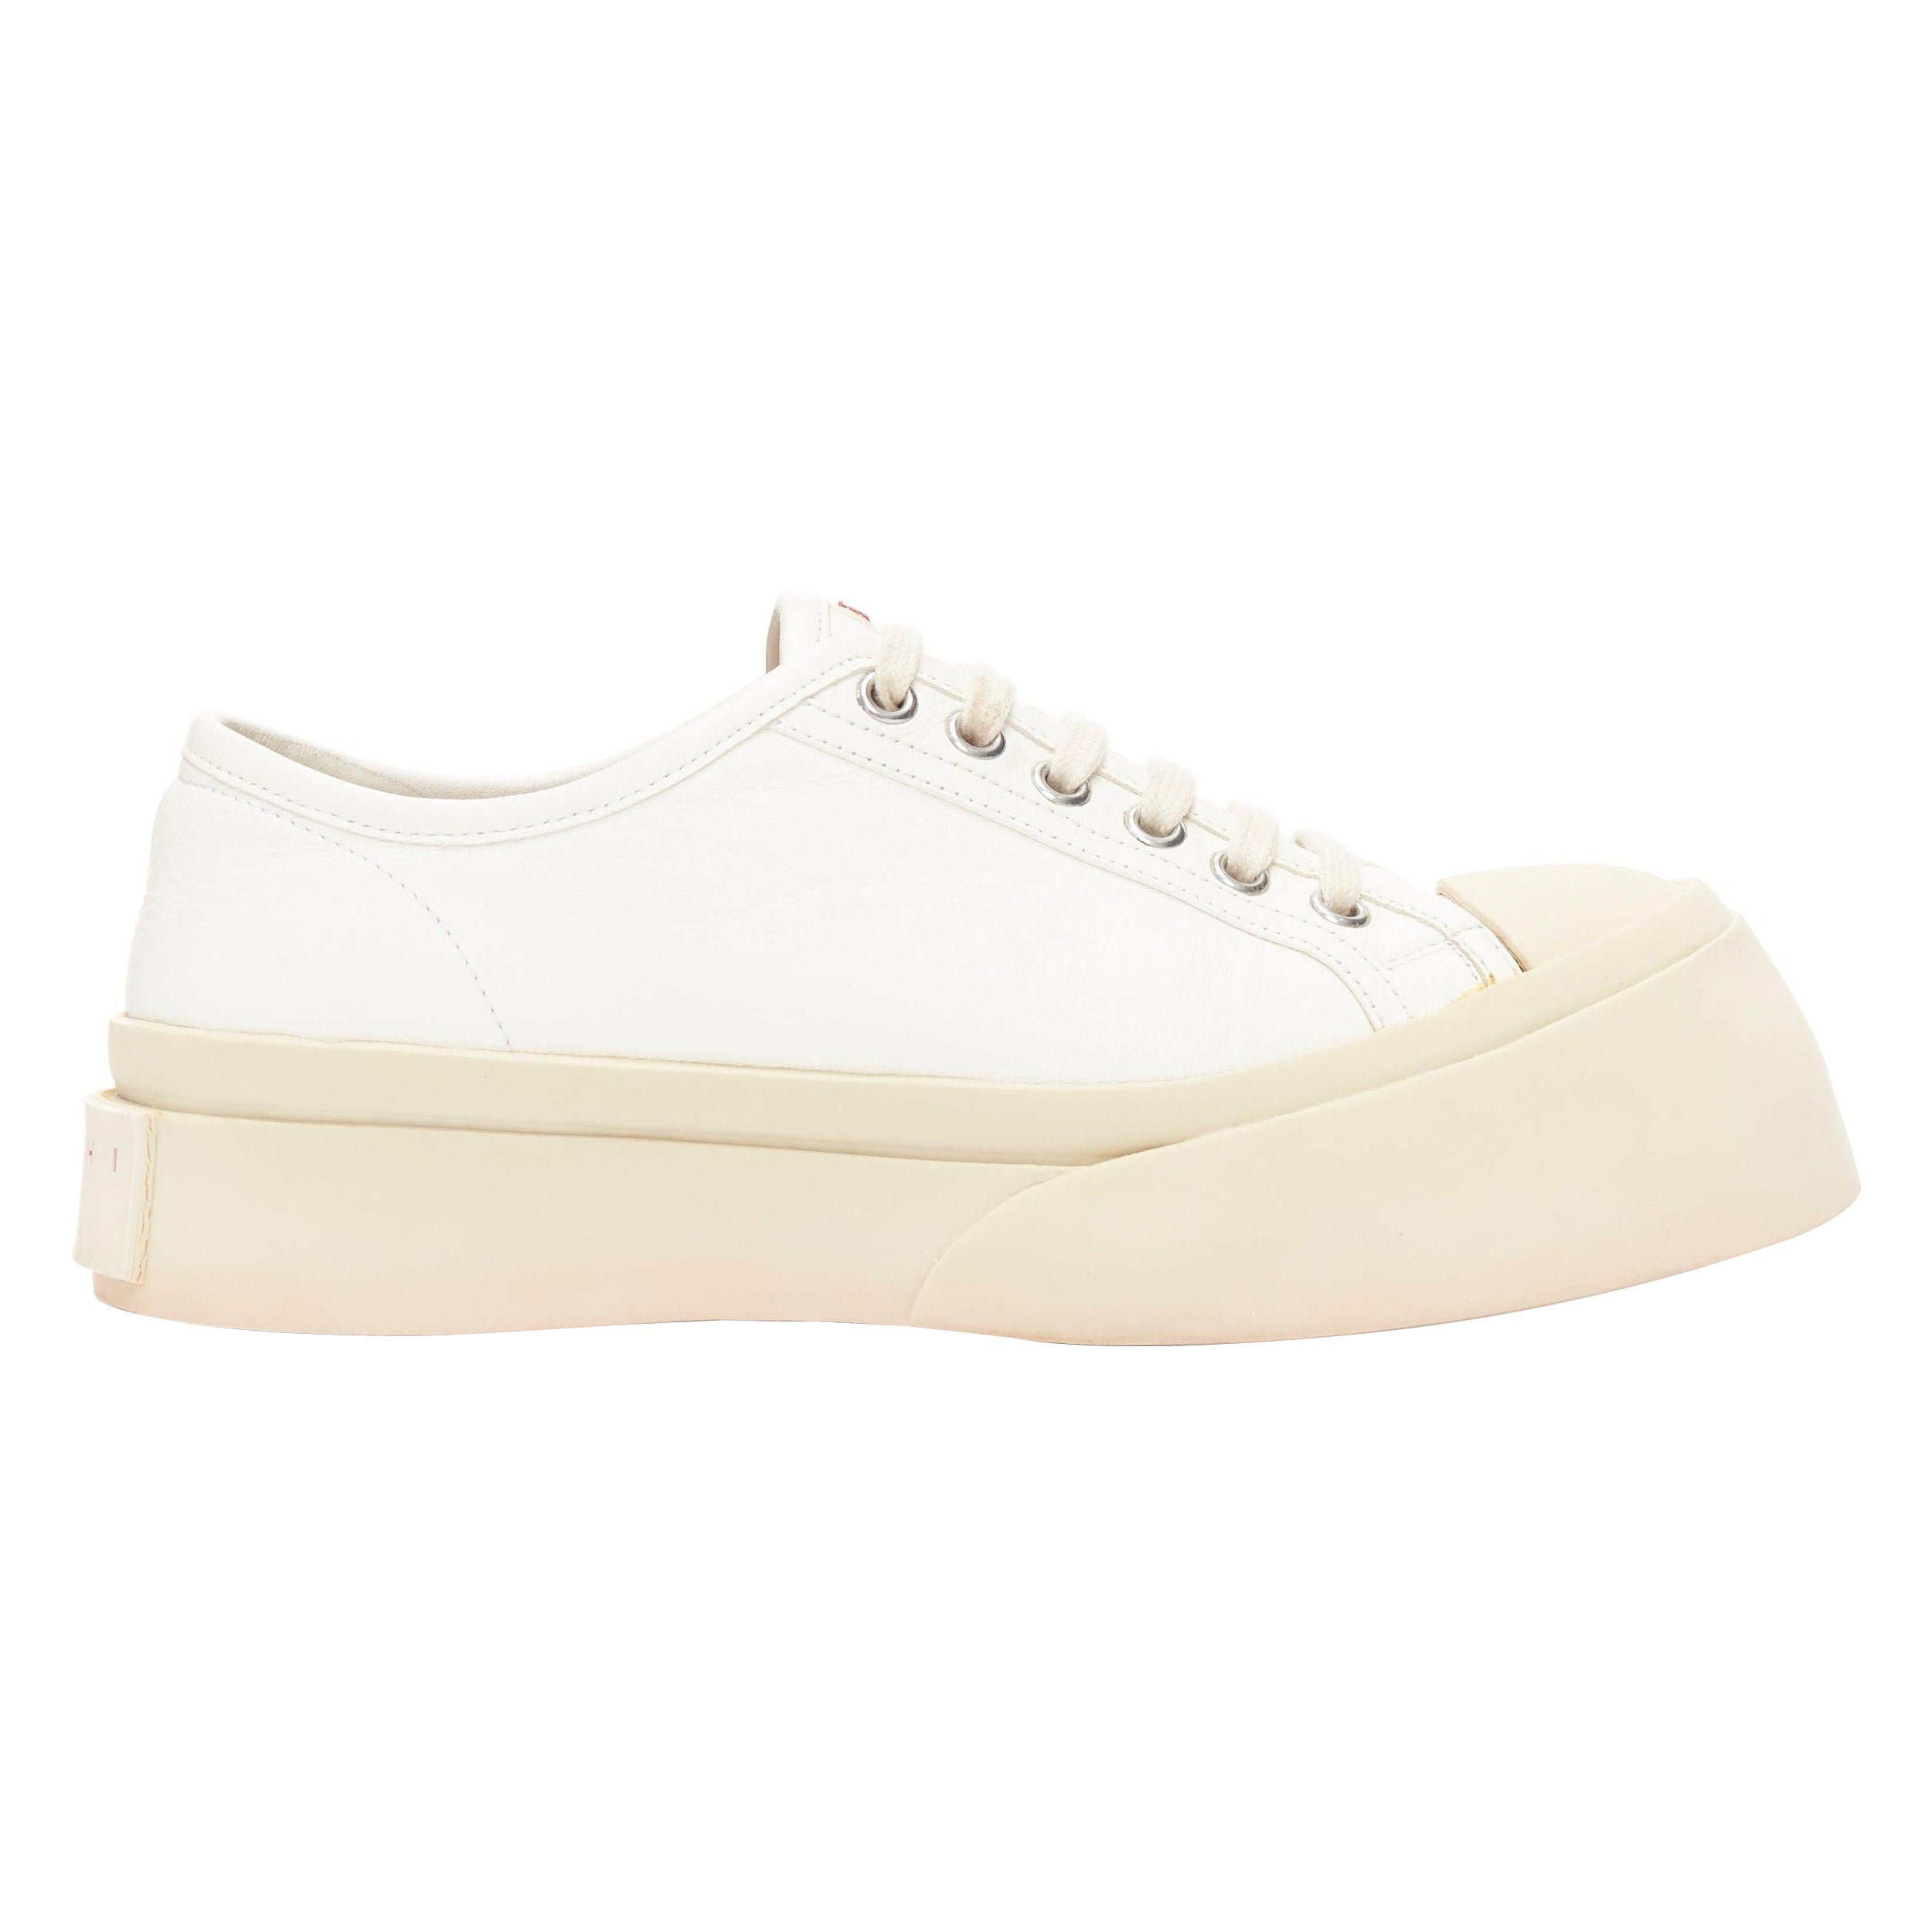 MARNI Pablo white leather chunky wide toe lace up low top sneakers EU36 For Sale